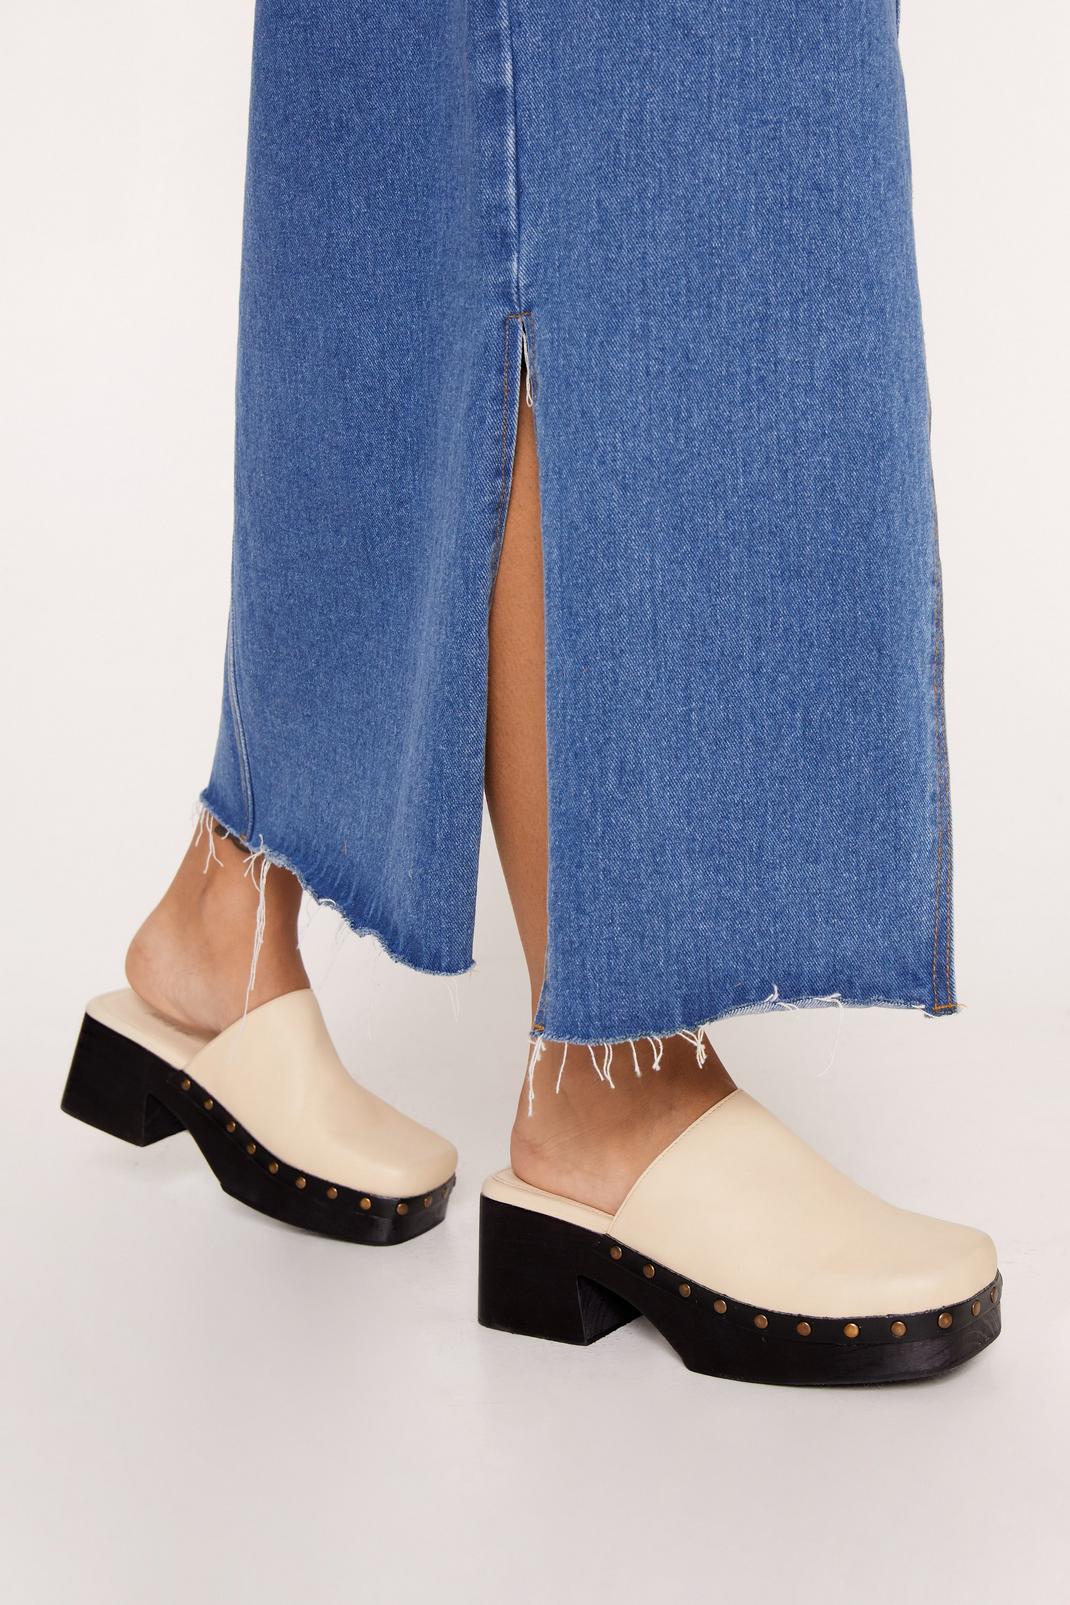 Nasty Gal Womens Studded Square Toe Clogs